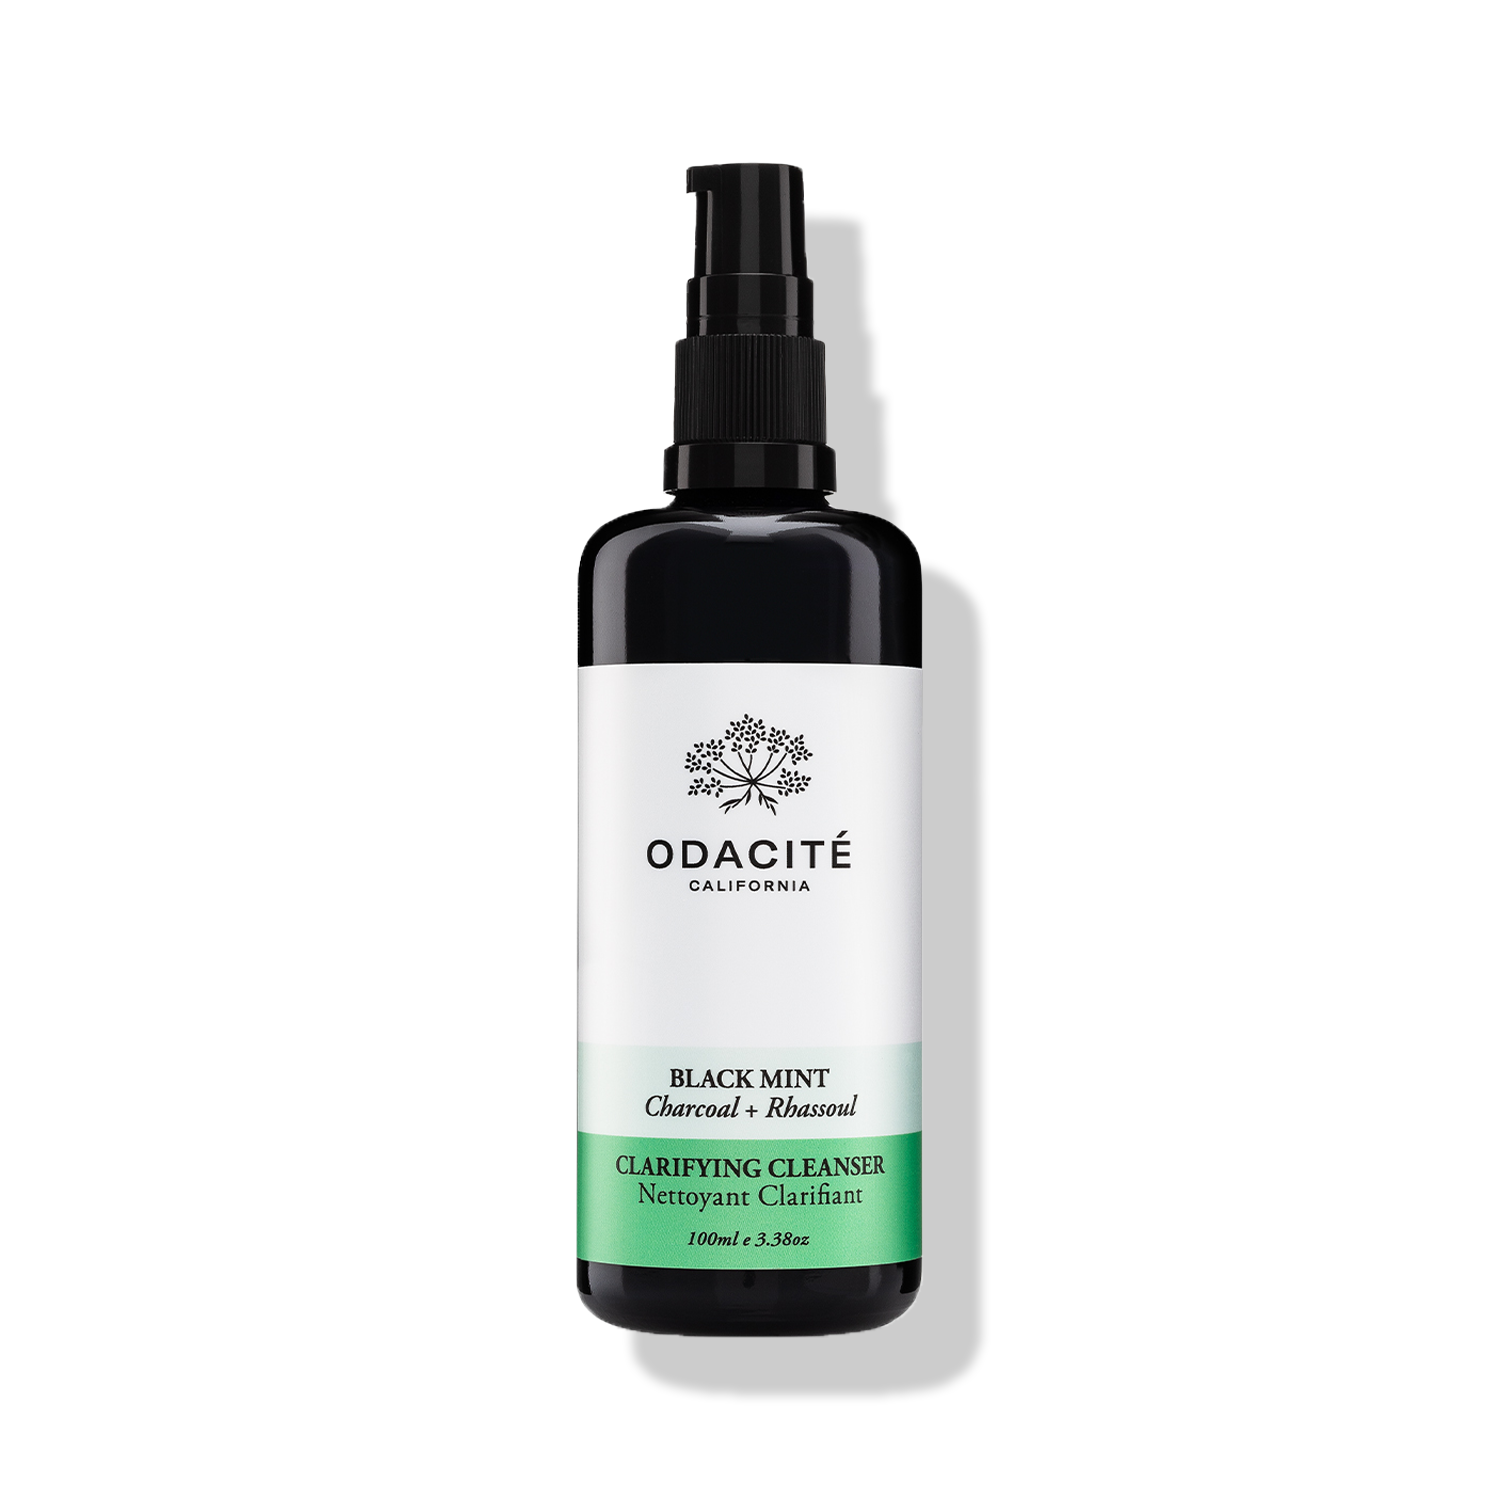 Odacite black mint purifying cleanser